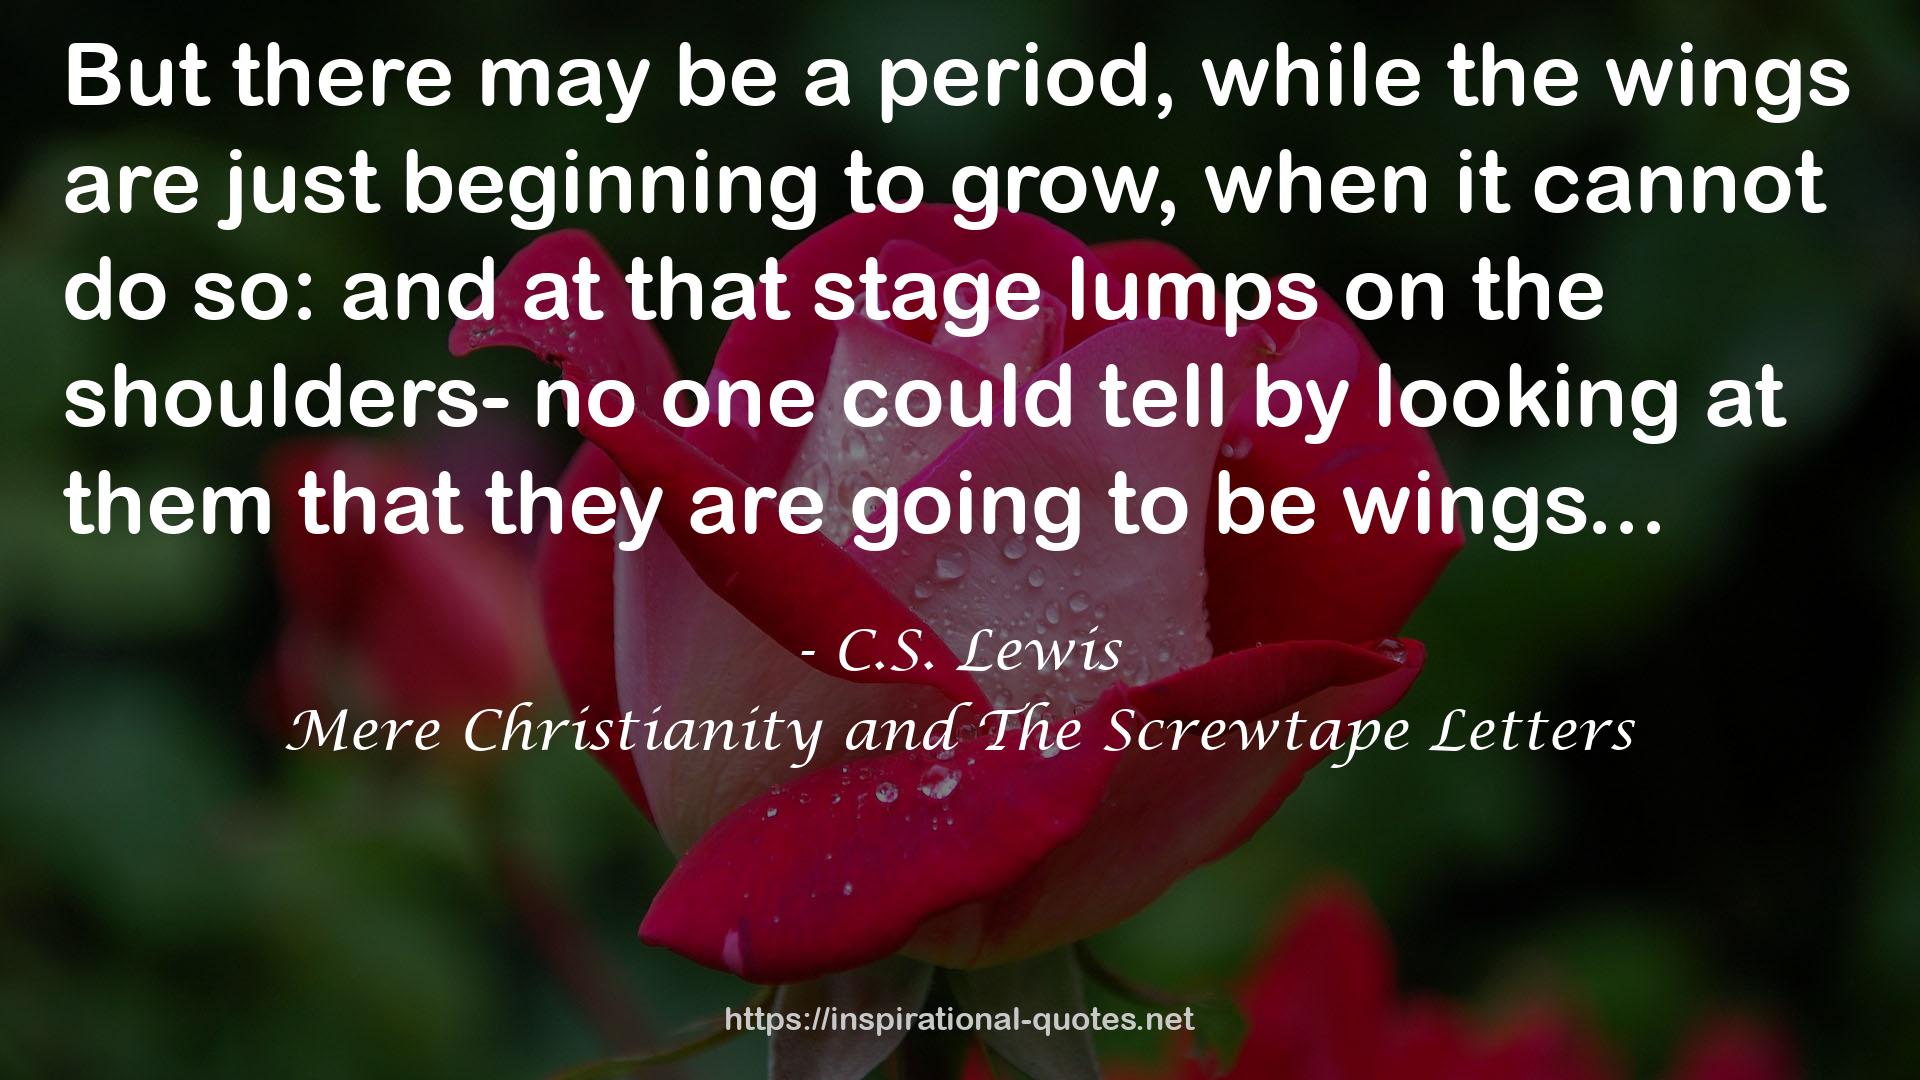 Mere Christianity and The Screwtape Letters QUOTES